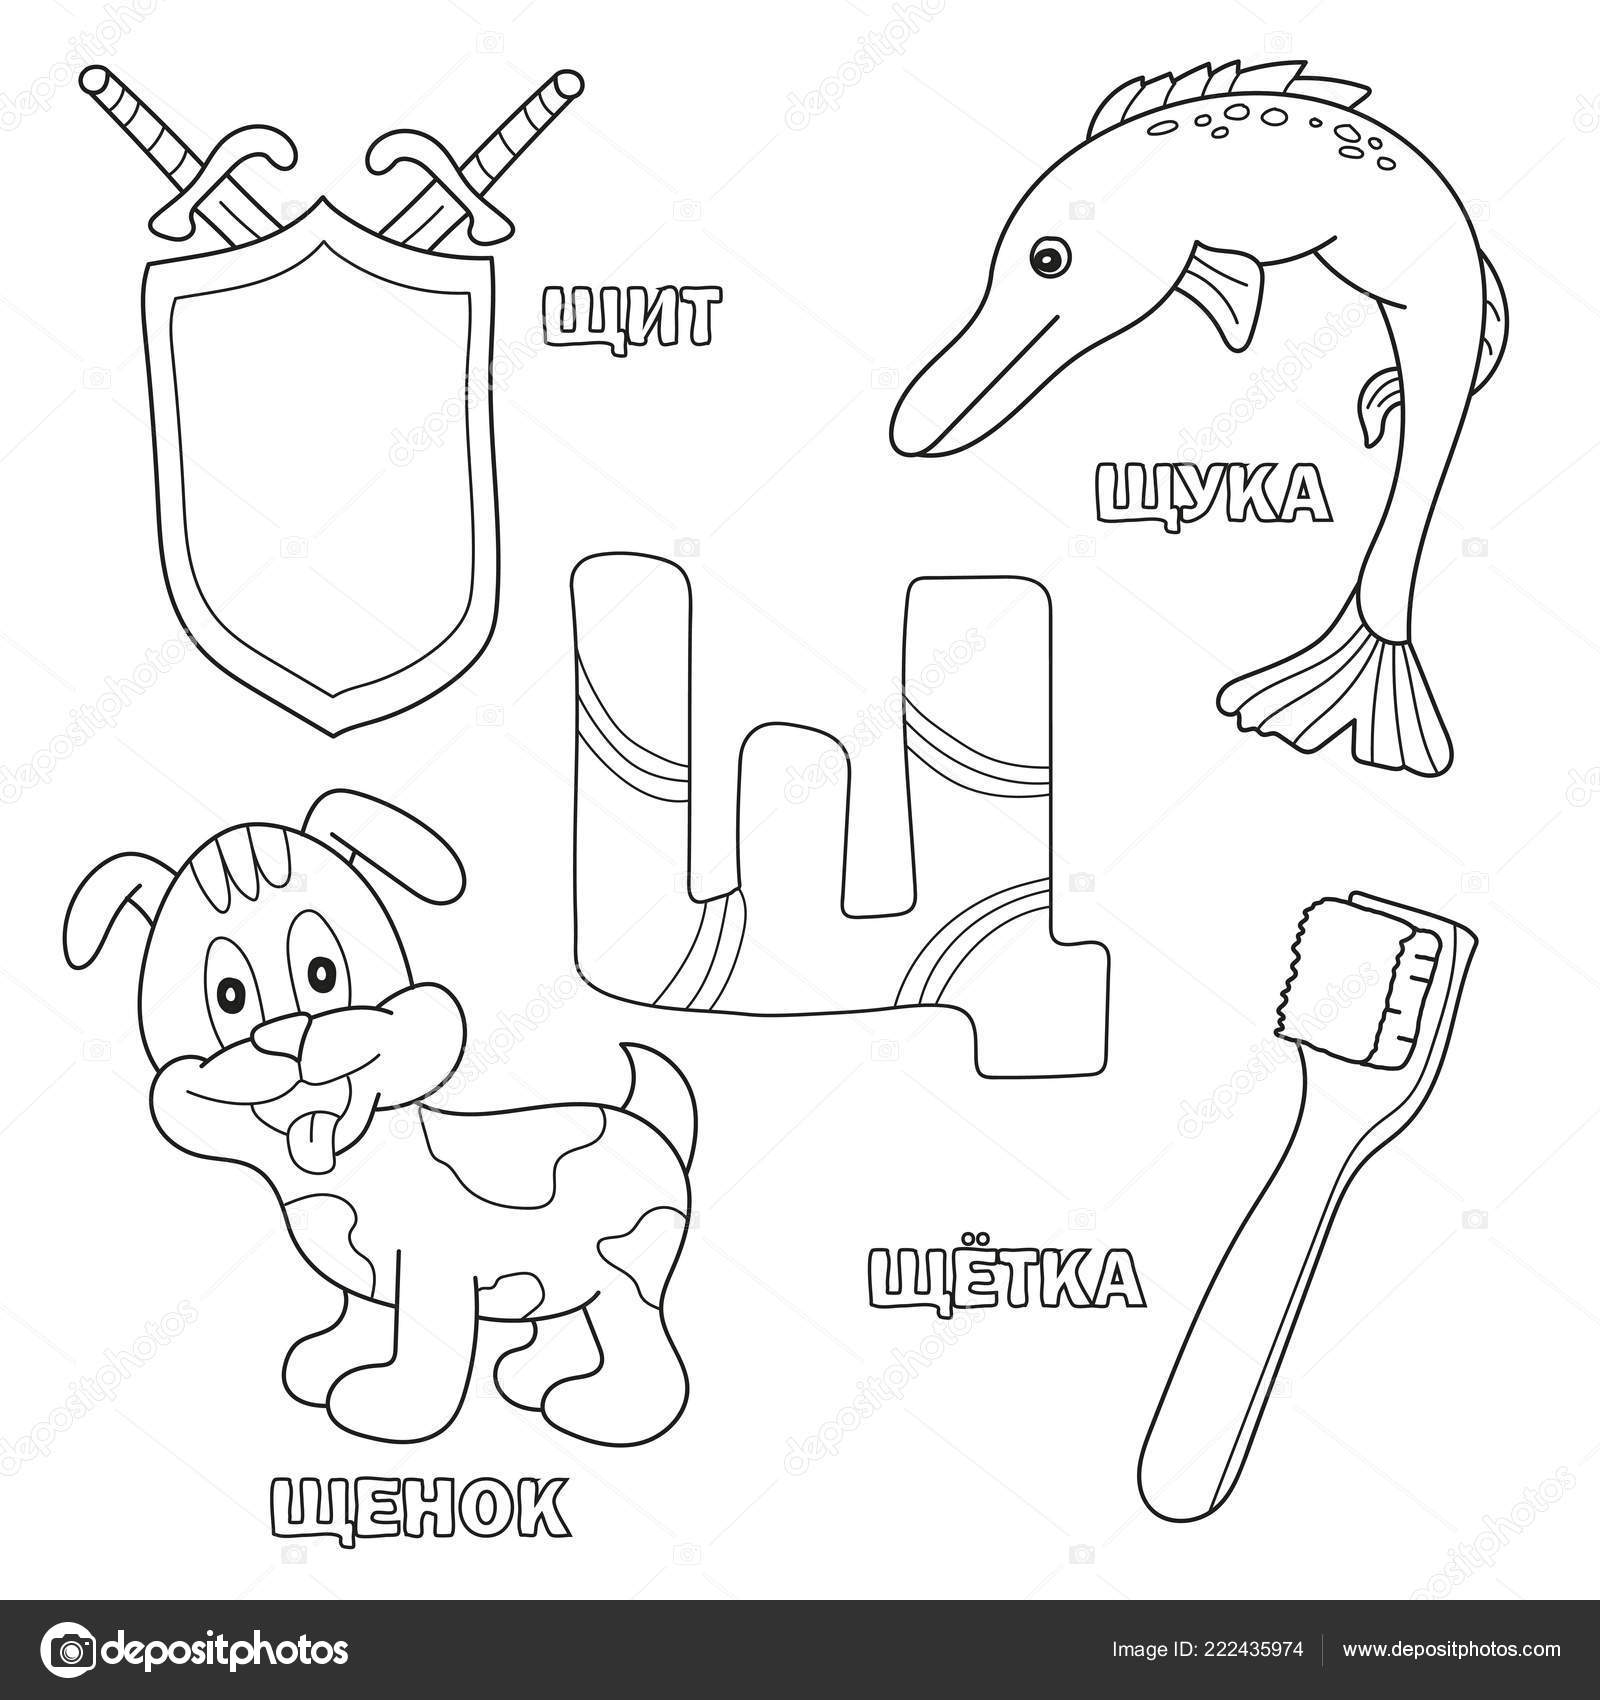 Download Alphabet Letter With Russian Pictures Of The Letter Coloring Book For Kids Vector Image By C Brill Vector Stock 222435974